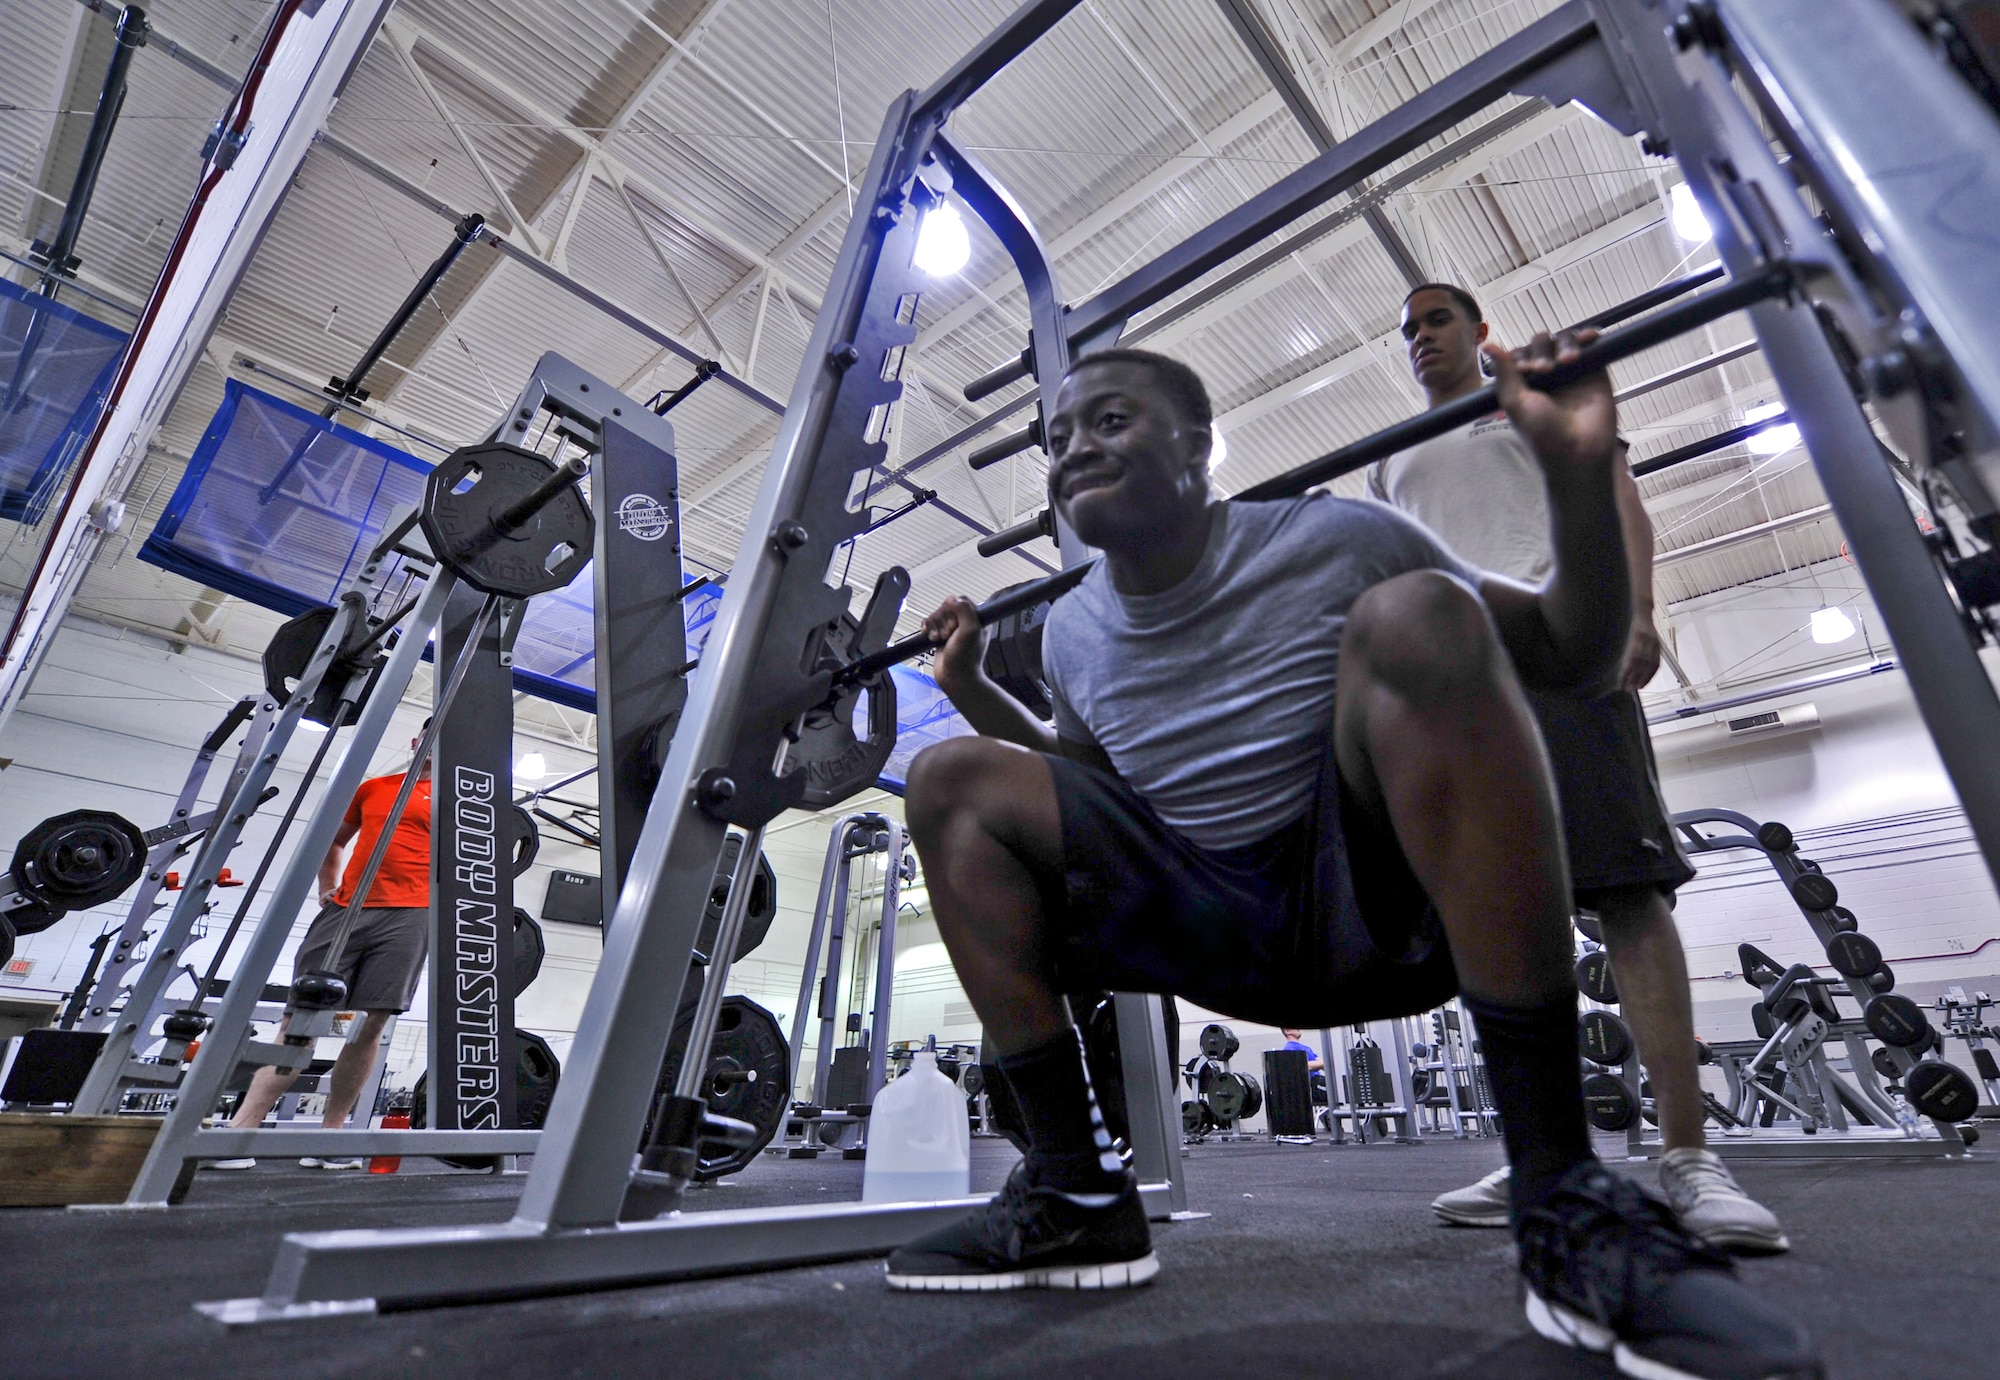 Senior Airman Kadeem Brisbane, 96th Security Forces Squadron response team leader performs a squat at the Commando Fitness Center on Hurlburt Field, Fla., April 7, 2014. Active duty, guard, reserve, and DoD civilian common access cardholders can sign up for the program, which currently has more than 1700 enrolled users.
(U.S. Air Force photo/Staff Sgt. John Bainter)
